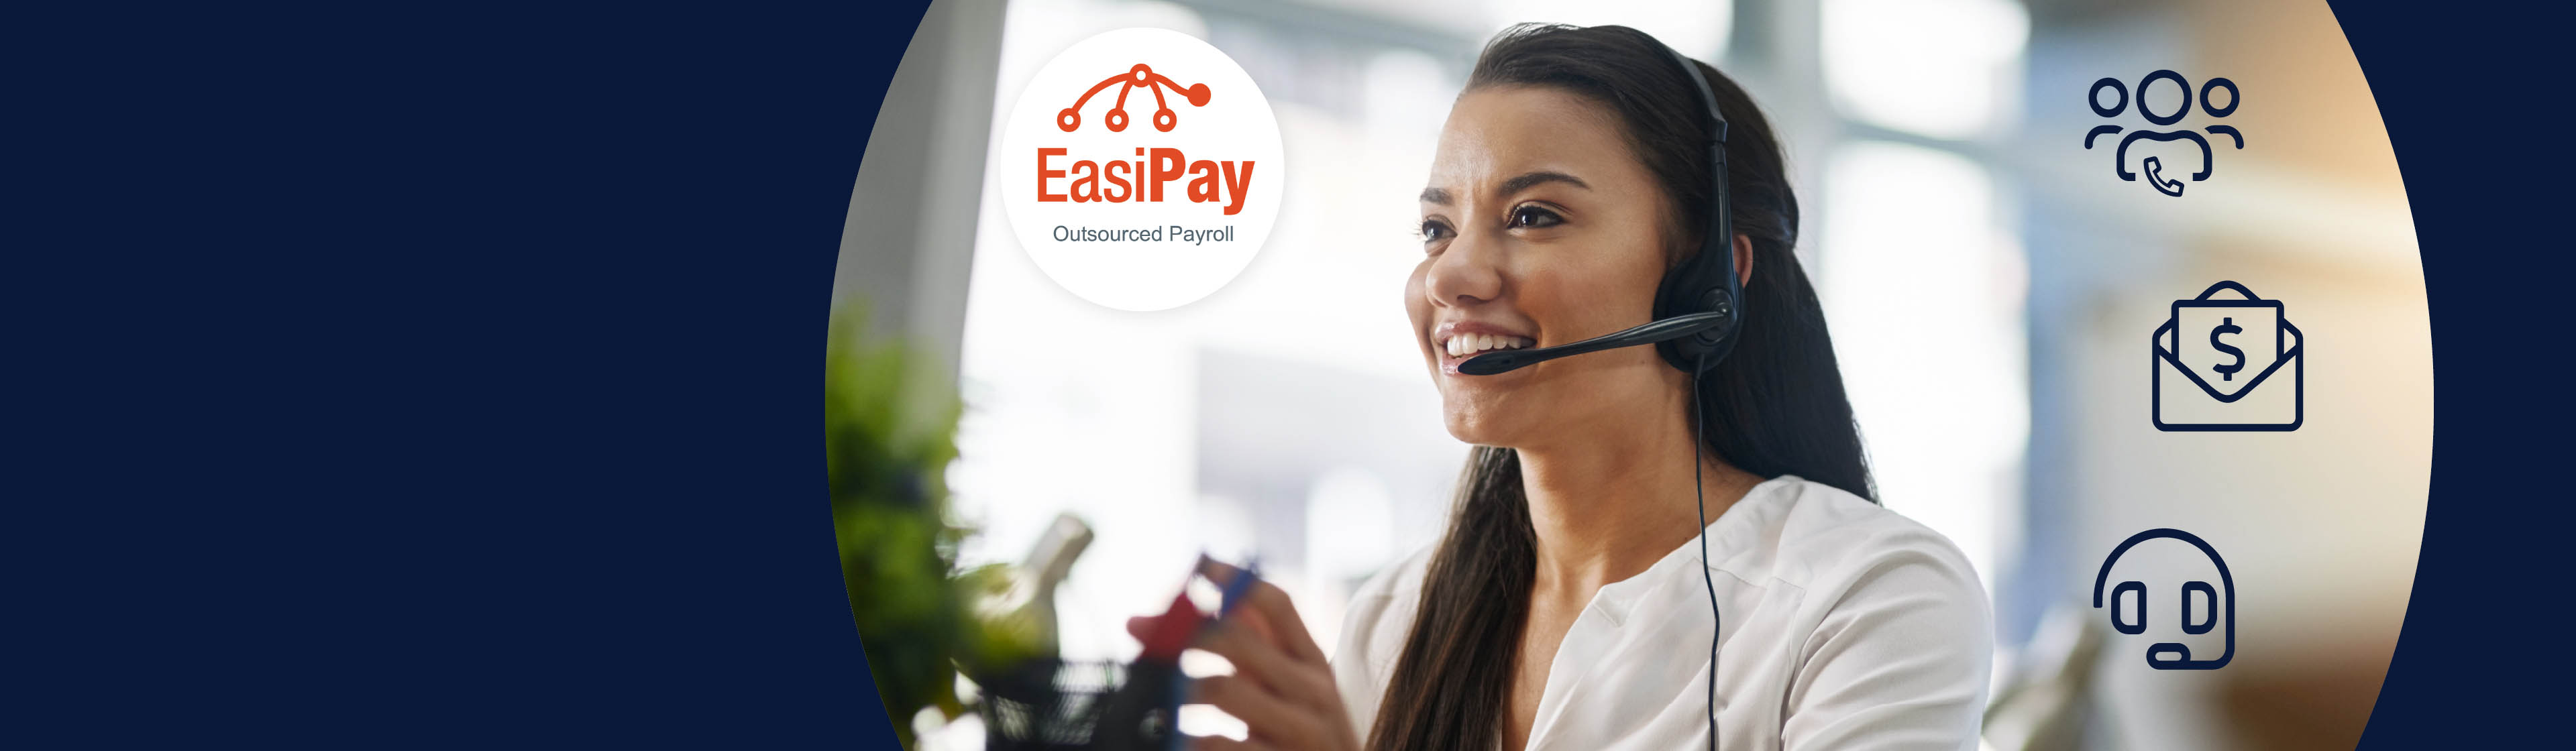 A female customer service representative using a headset and payroll icons